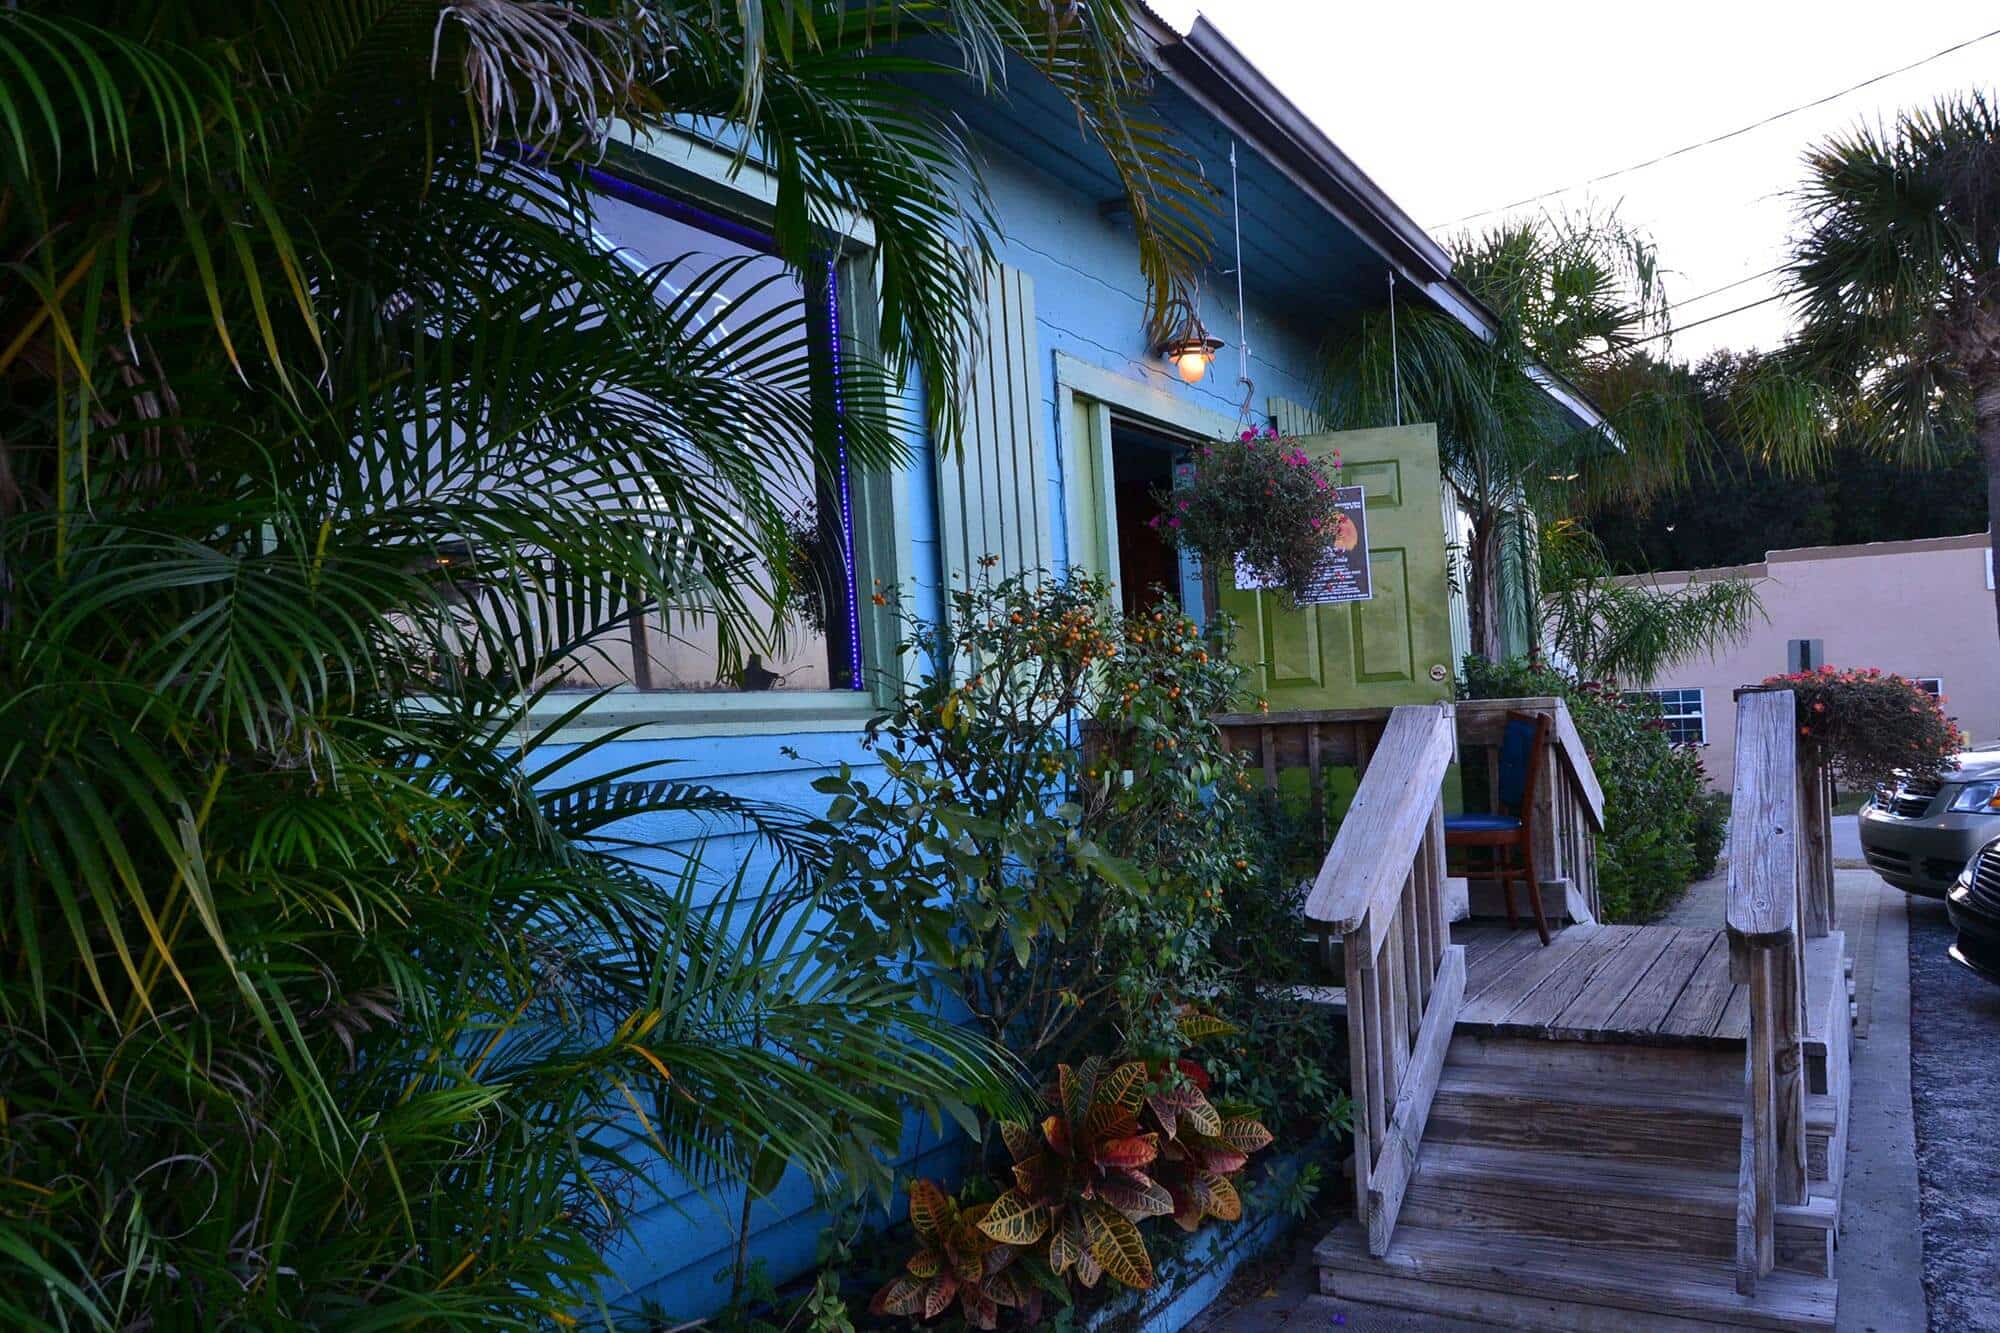 Exterior of building and steps up to front door at Crazy Fish Bar & Grill in Lake Wales, FL